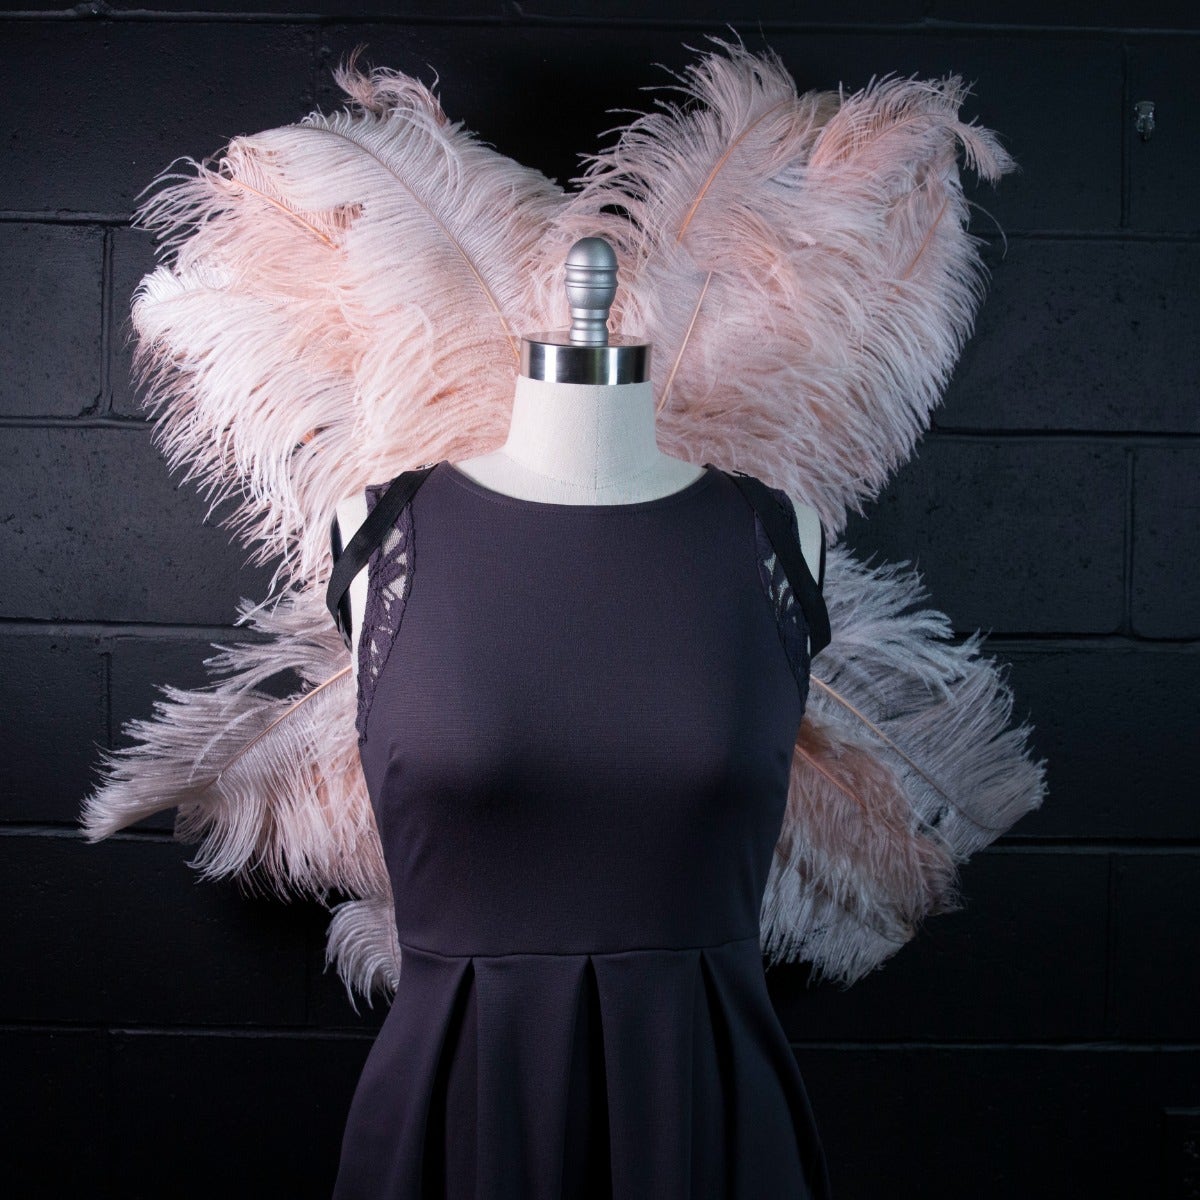 Medium Upcycled Ostrich Feather Costume Wings - Champagne